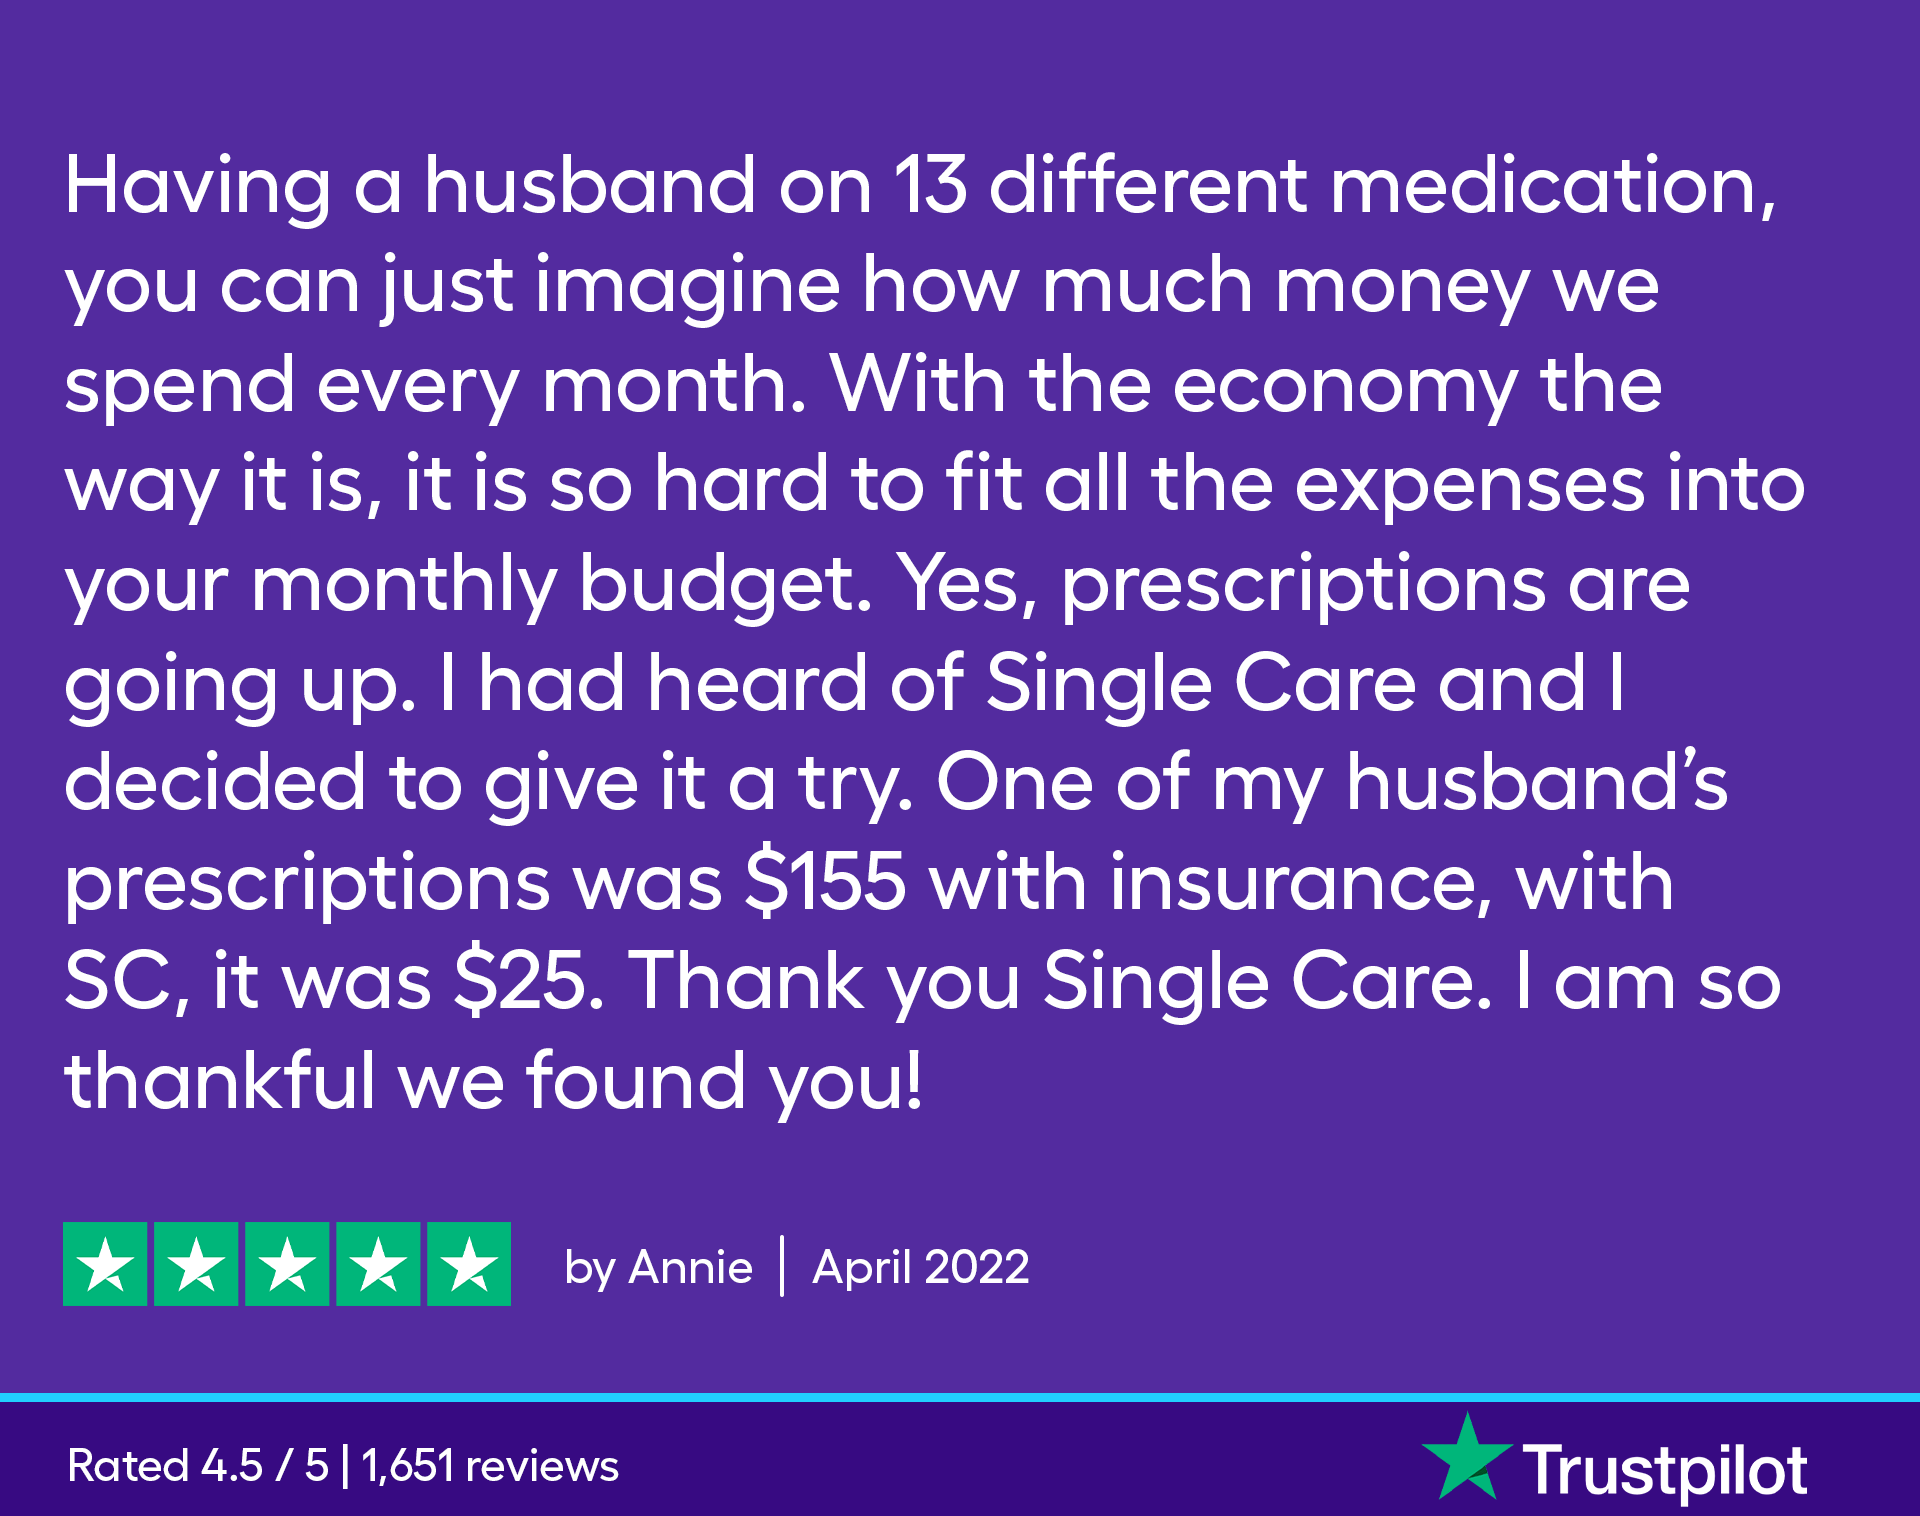 Having a husband on 13 different medication, you can just imagine how much money we spend every month. With the economy the way it is, it is so hard to fit all the expenses into your monthly budget. Yes, prescriptions are going up. I had heard of Single Care and I decided to give it a try. One of my husband’s prescriptions was $155 with insurance, with SC, it was $25. Thank you Single Care. I am so thankful we found you!